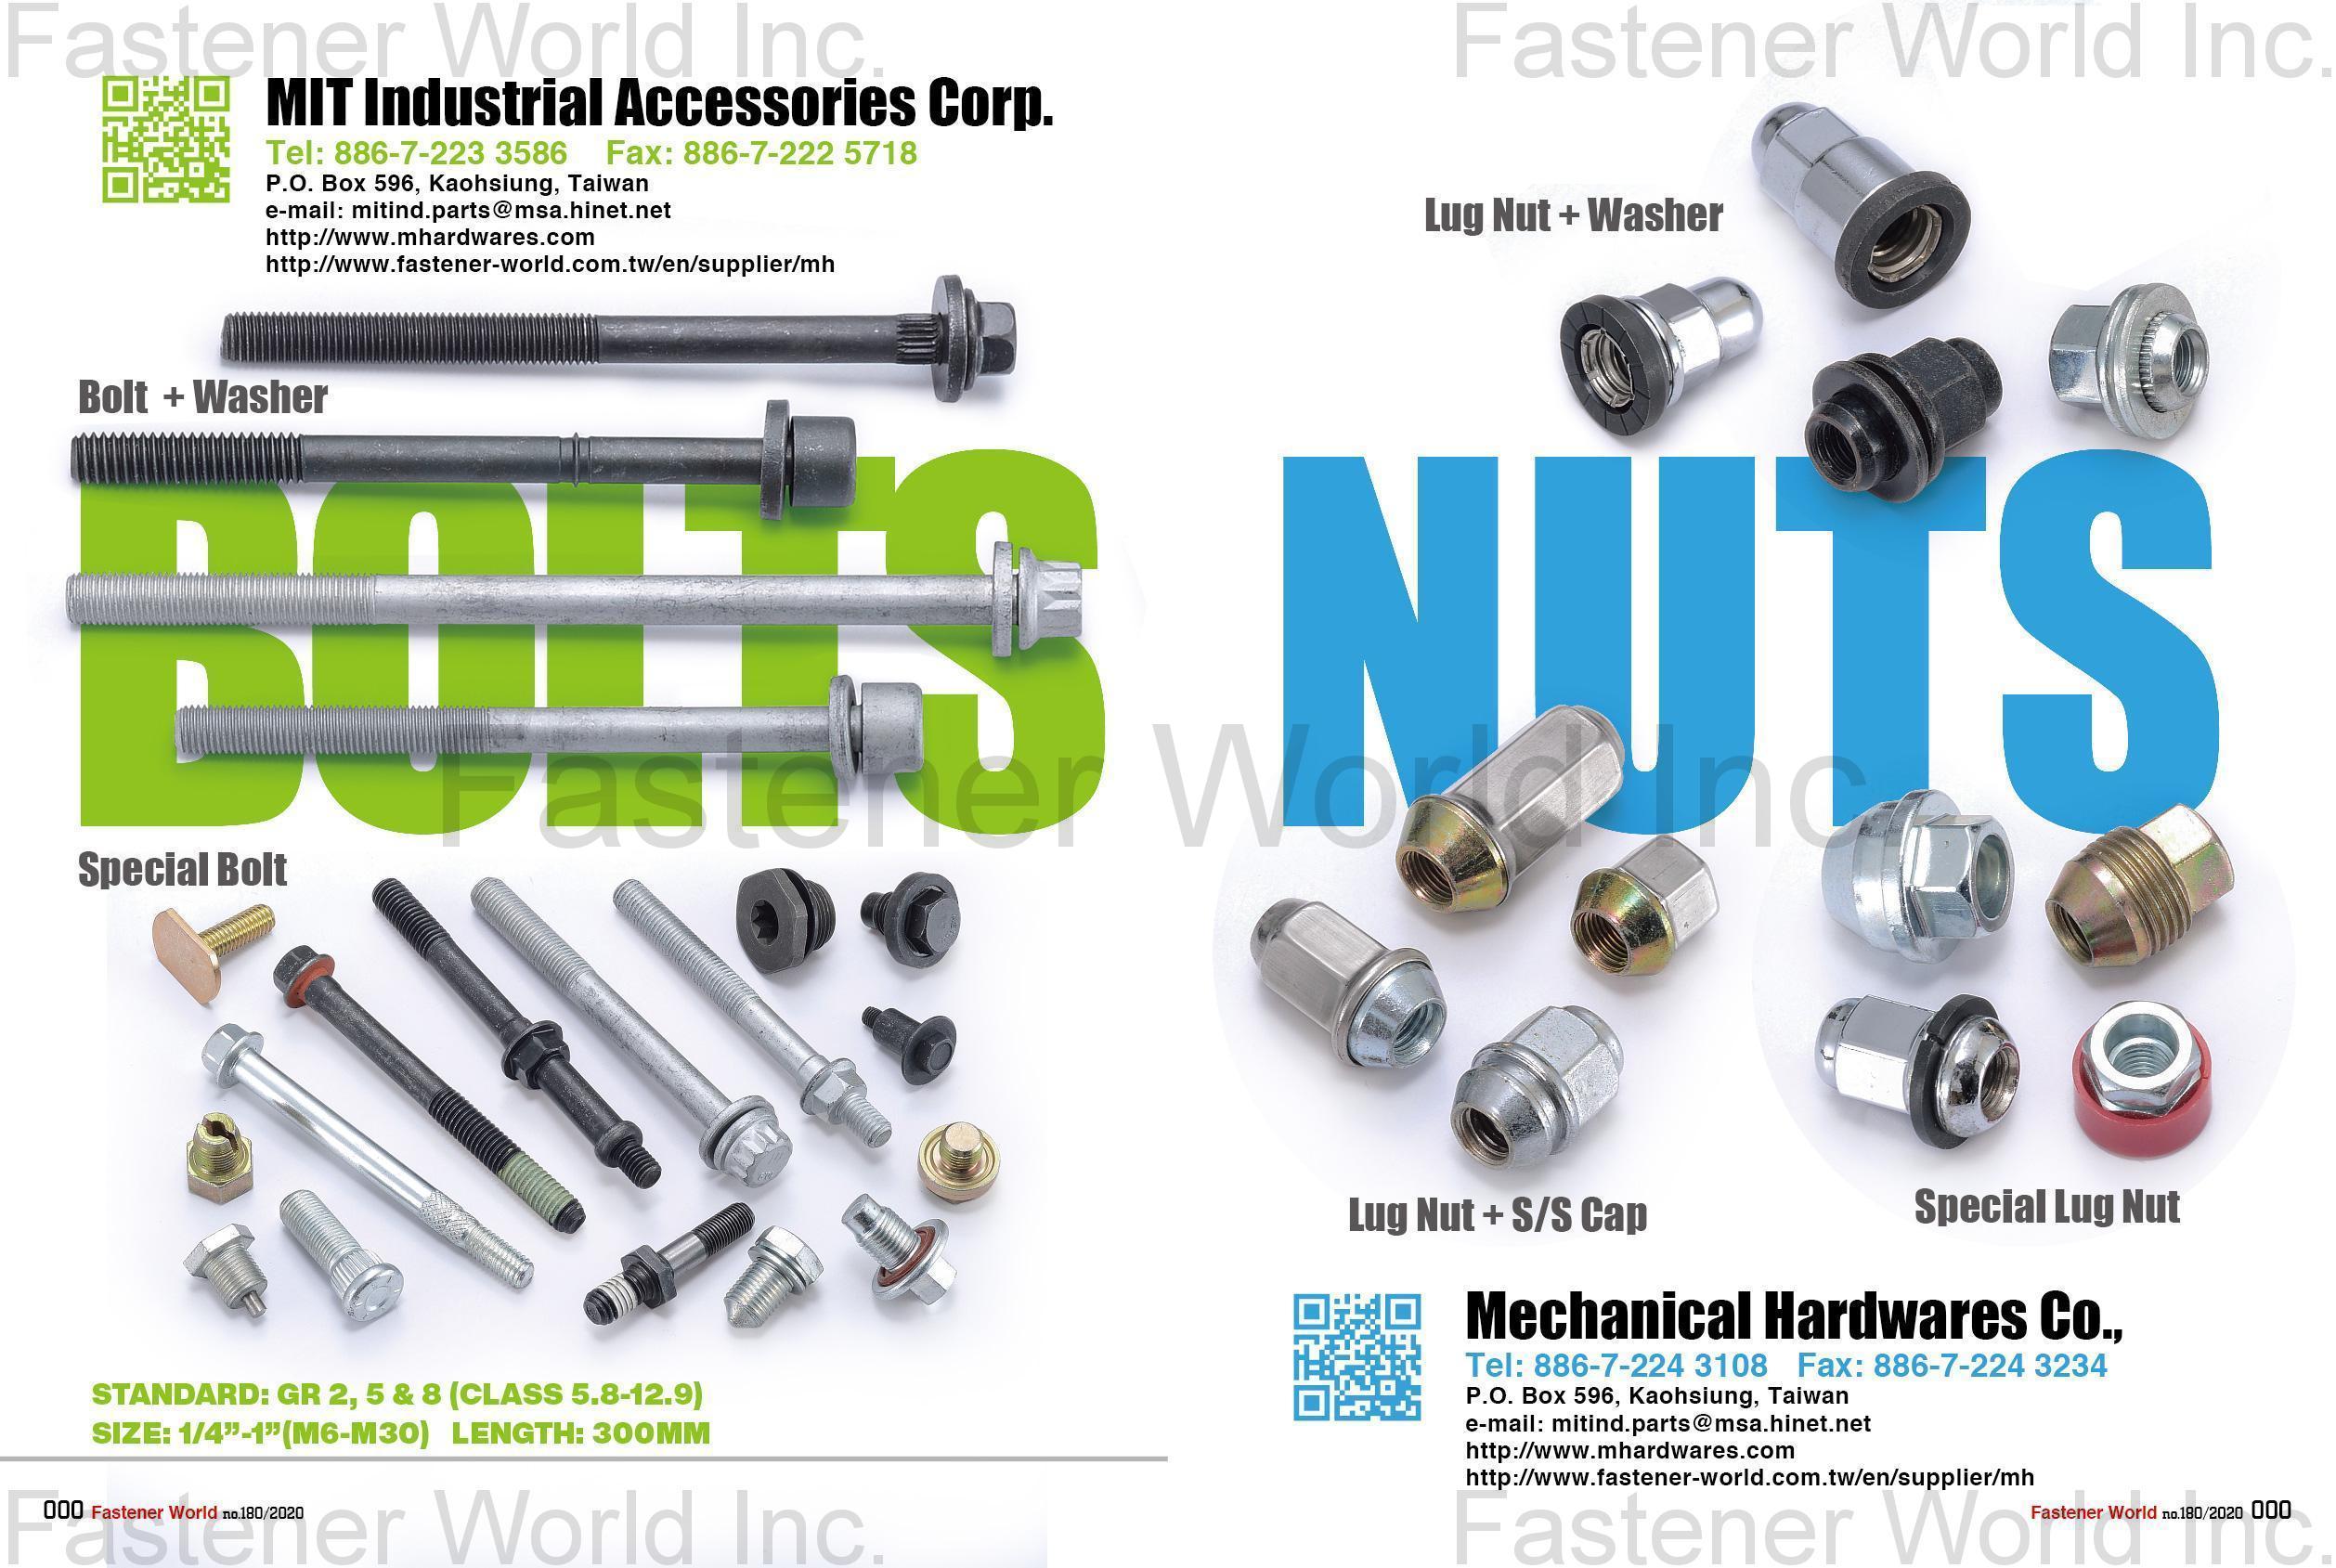 MIT INDUSTRIAL ACCESSORIES CORP. (MECHANICAL HARDWARES CO.) , Bolts+Washers, Special Bolts, Lug Nut + Washers, Lug Nut + S/S Cap, Special Lug Nuts , Special Bolts